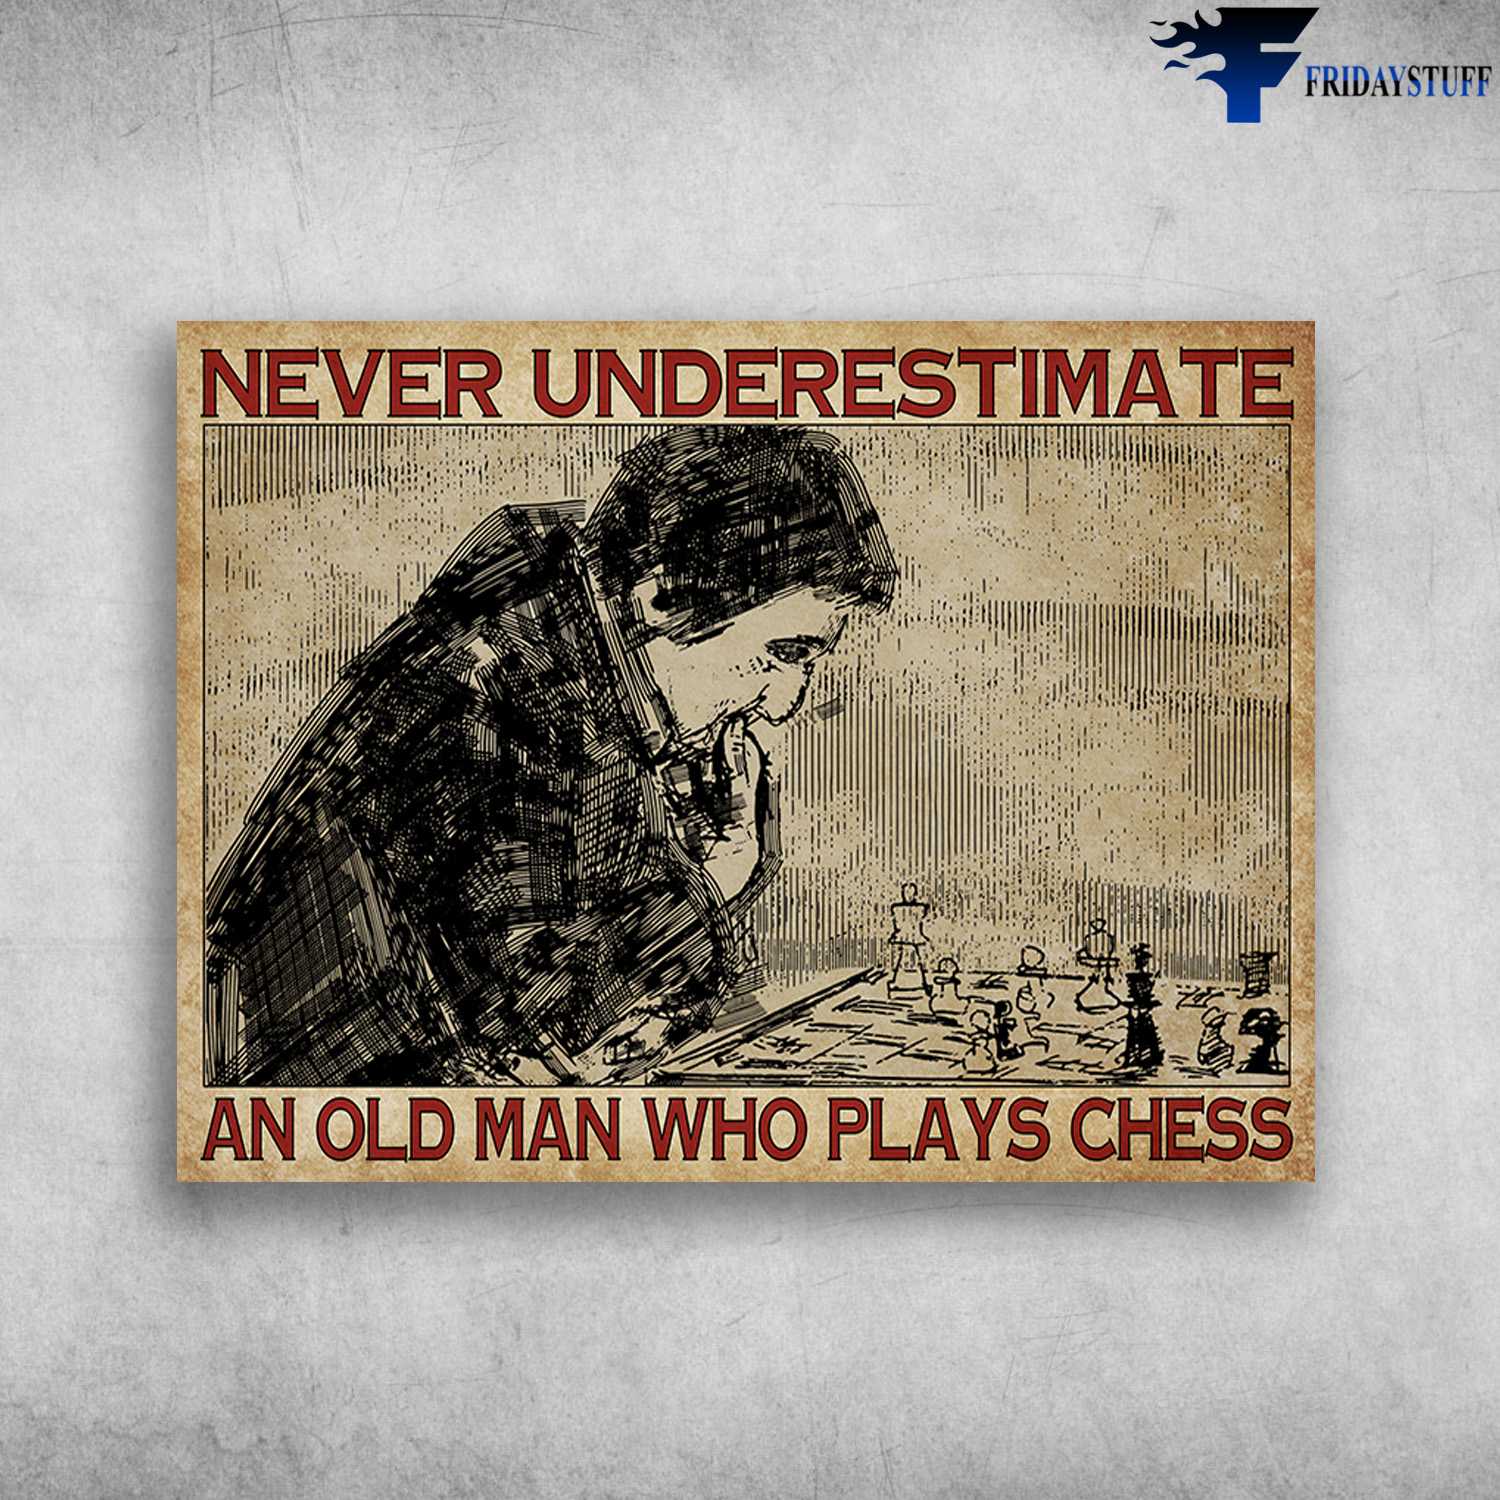 Chess Lover, Chess Poster, Chess Player, Never Underestimate, An Old Man Who Plays Chess